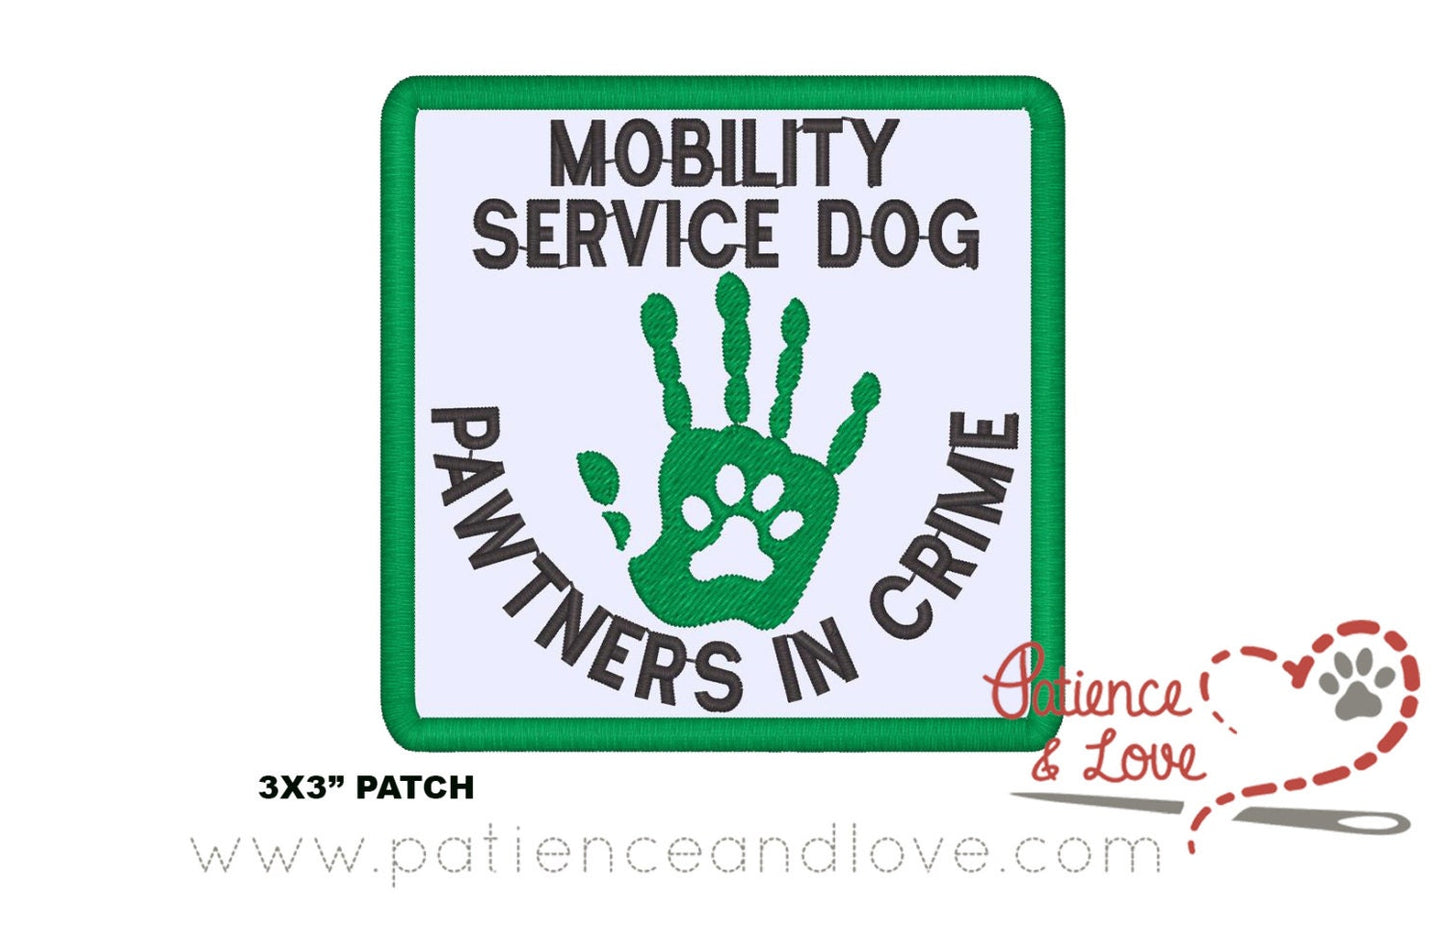 Mobility Service dog Pawtners in Crime with cute handprint with paw, 3 x 3", square patch